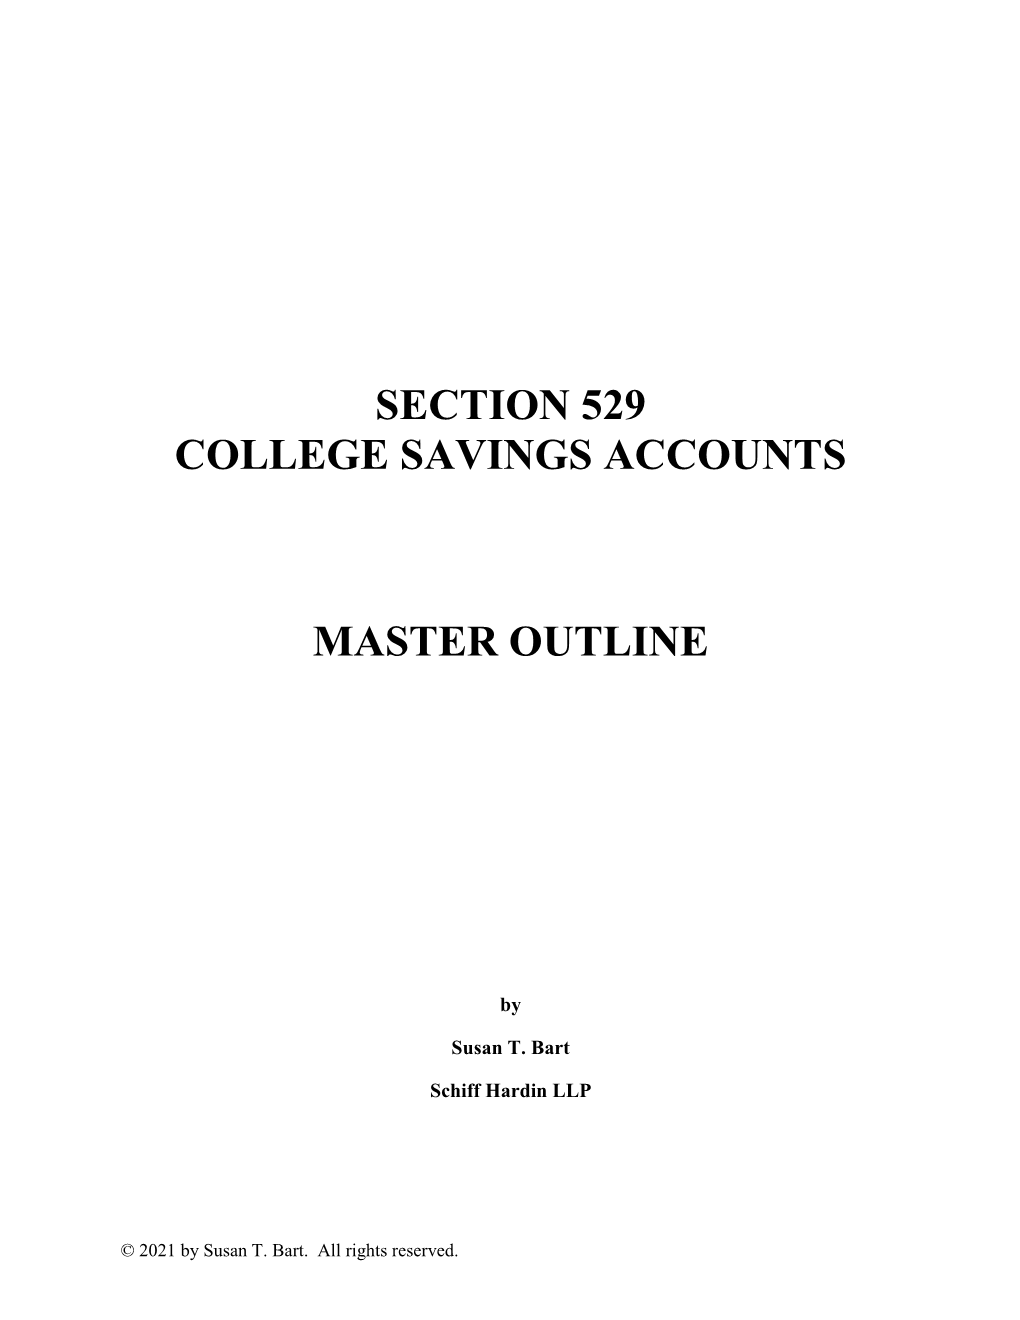 Section 529 College Savings Accounts Master Outline